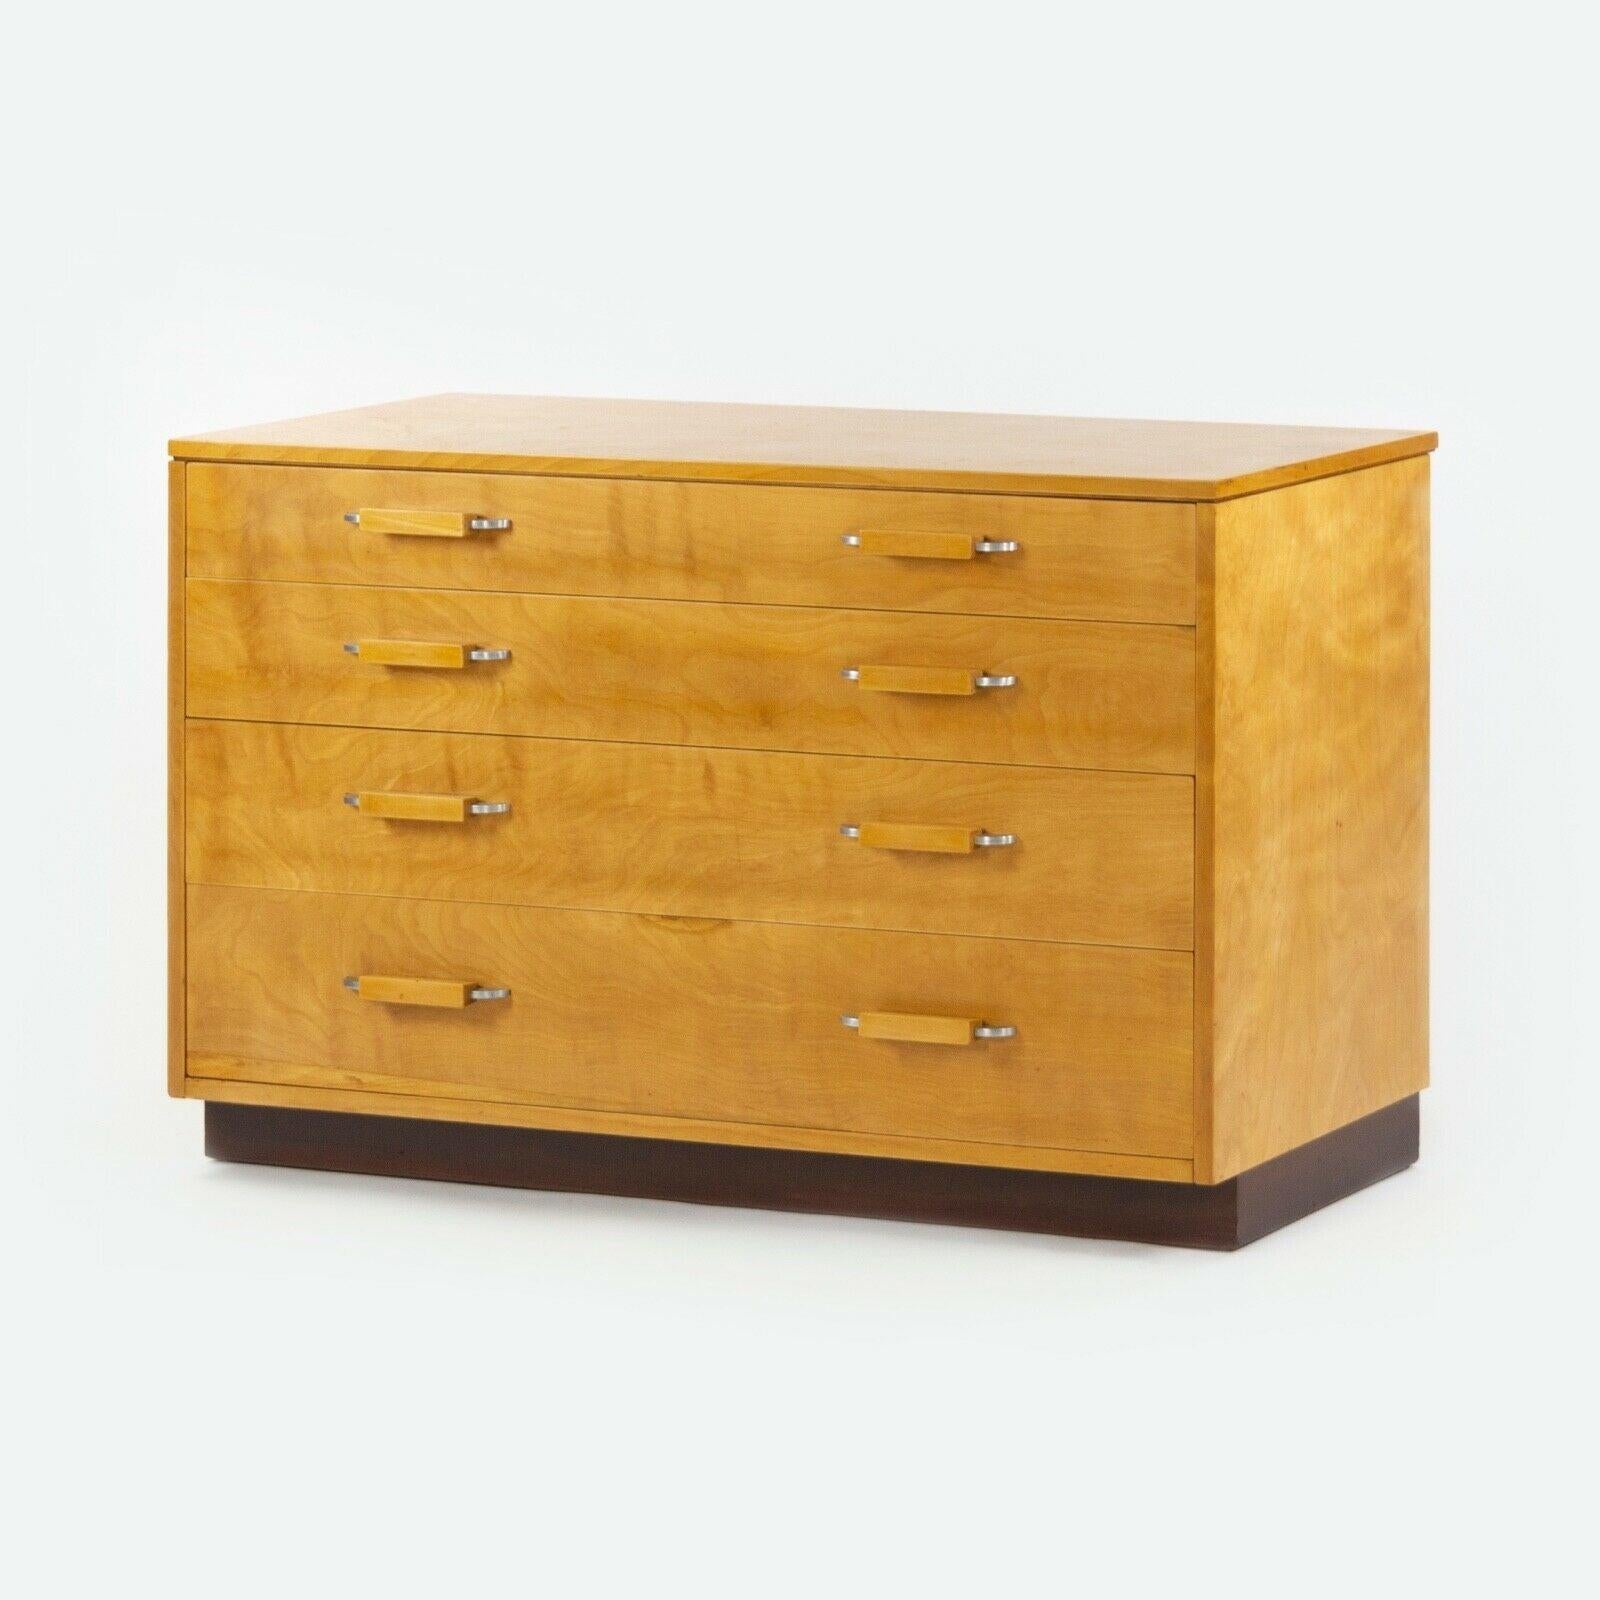 Listed for sale is a gorgeous and beautifully restored Eliel Saarinen, J. Robert Swanson, and Pipsan Saarinen Swanson 4-drawer dresser, produced by Johnson Furniture Co. circa 1939. This example came from an Ithaca, NY estate and has been lovingly